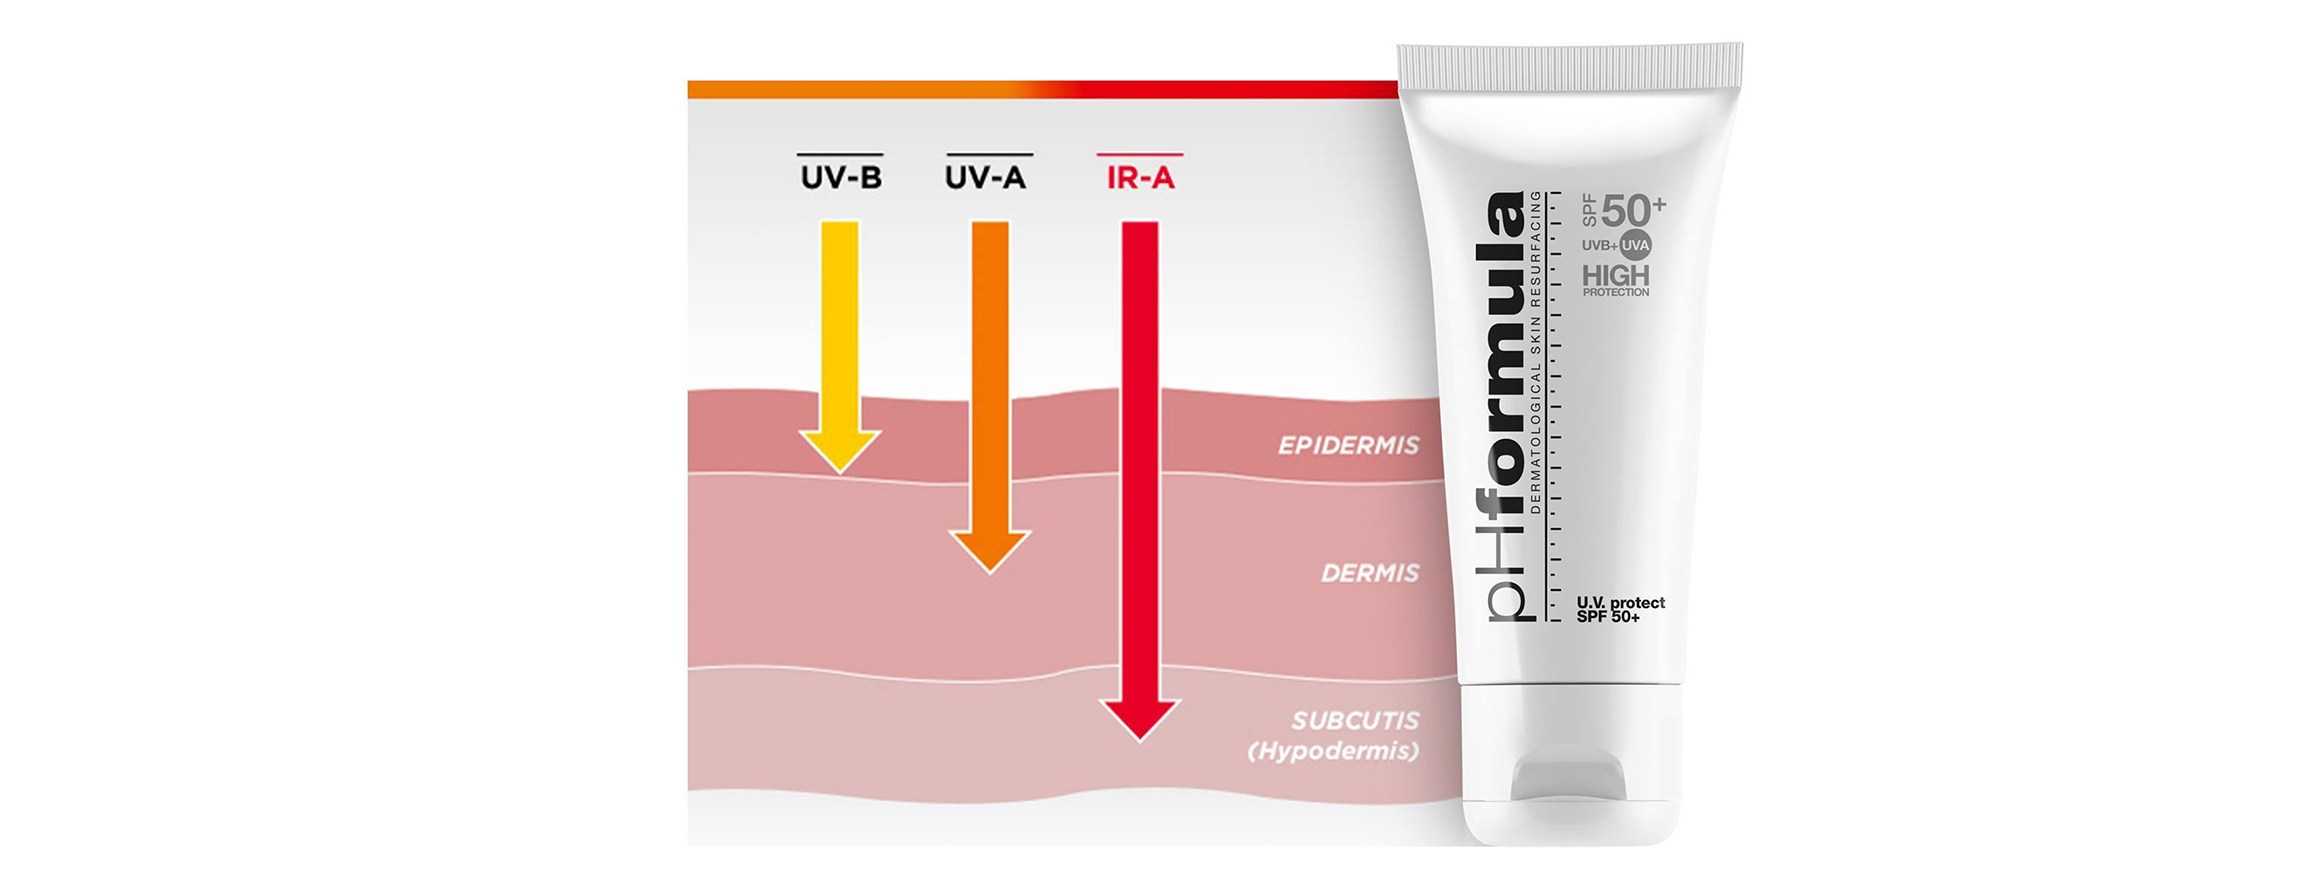 IRA rays are known to stimulate the production of collagen